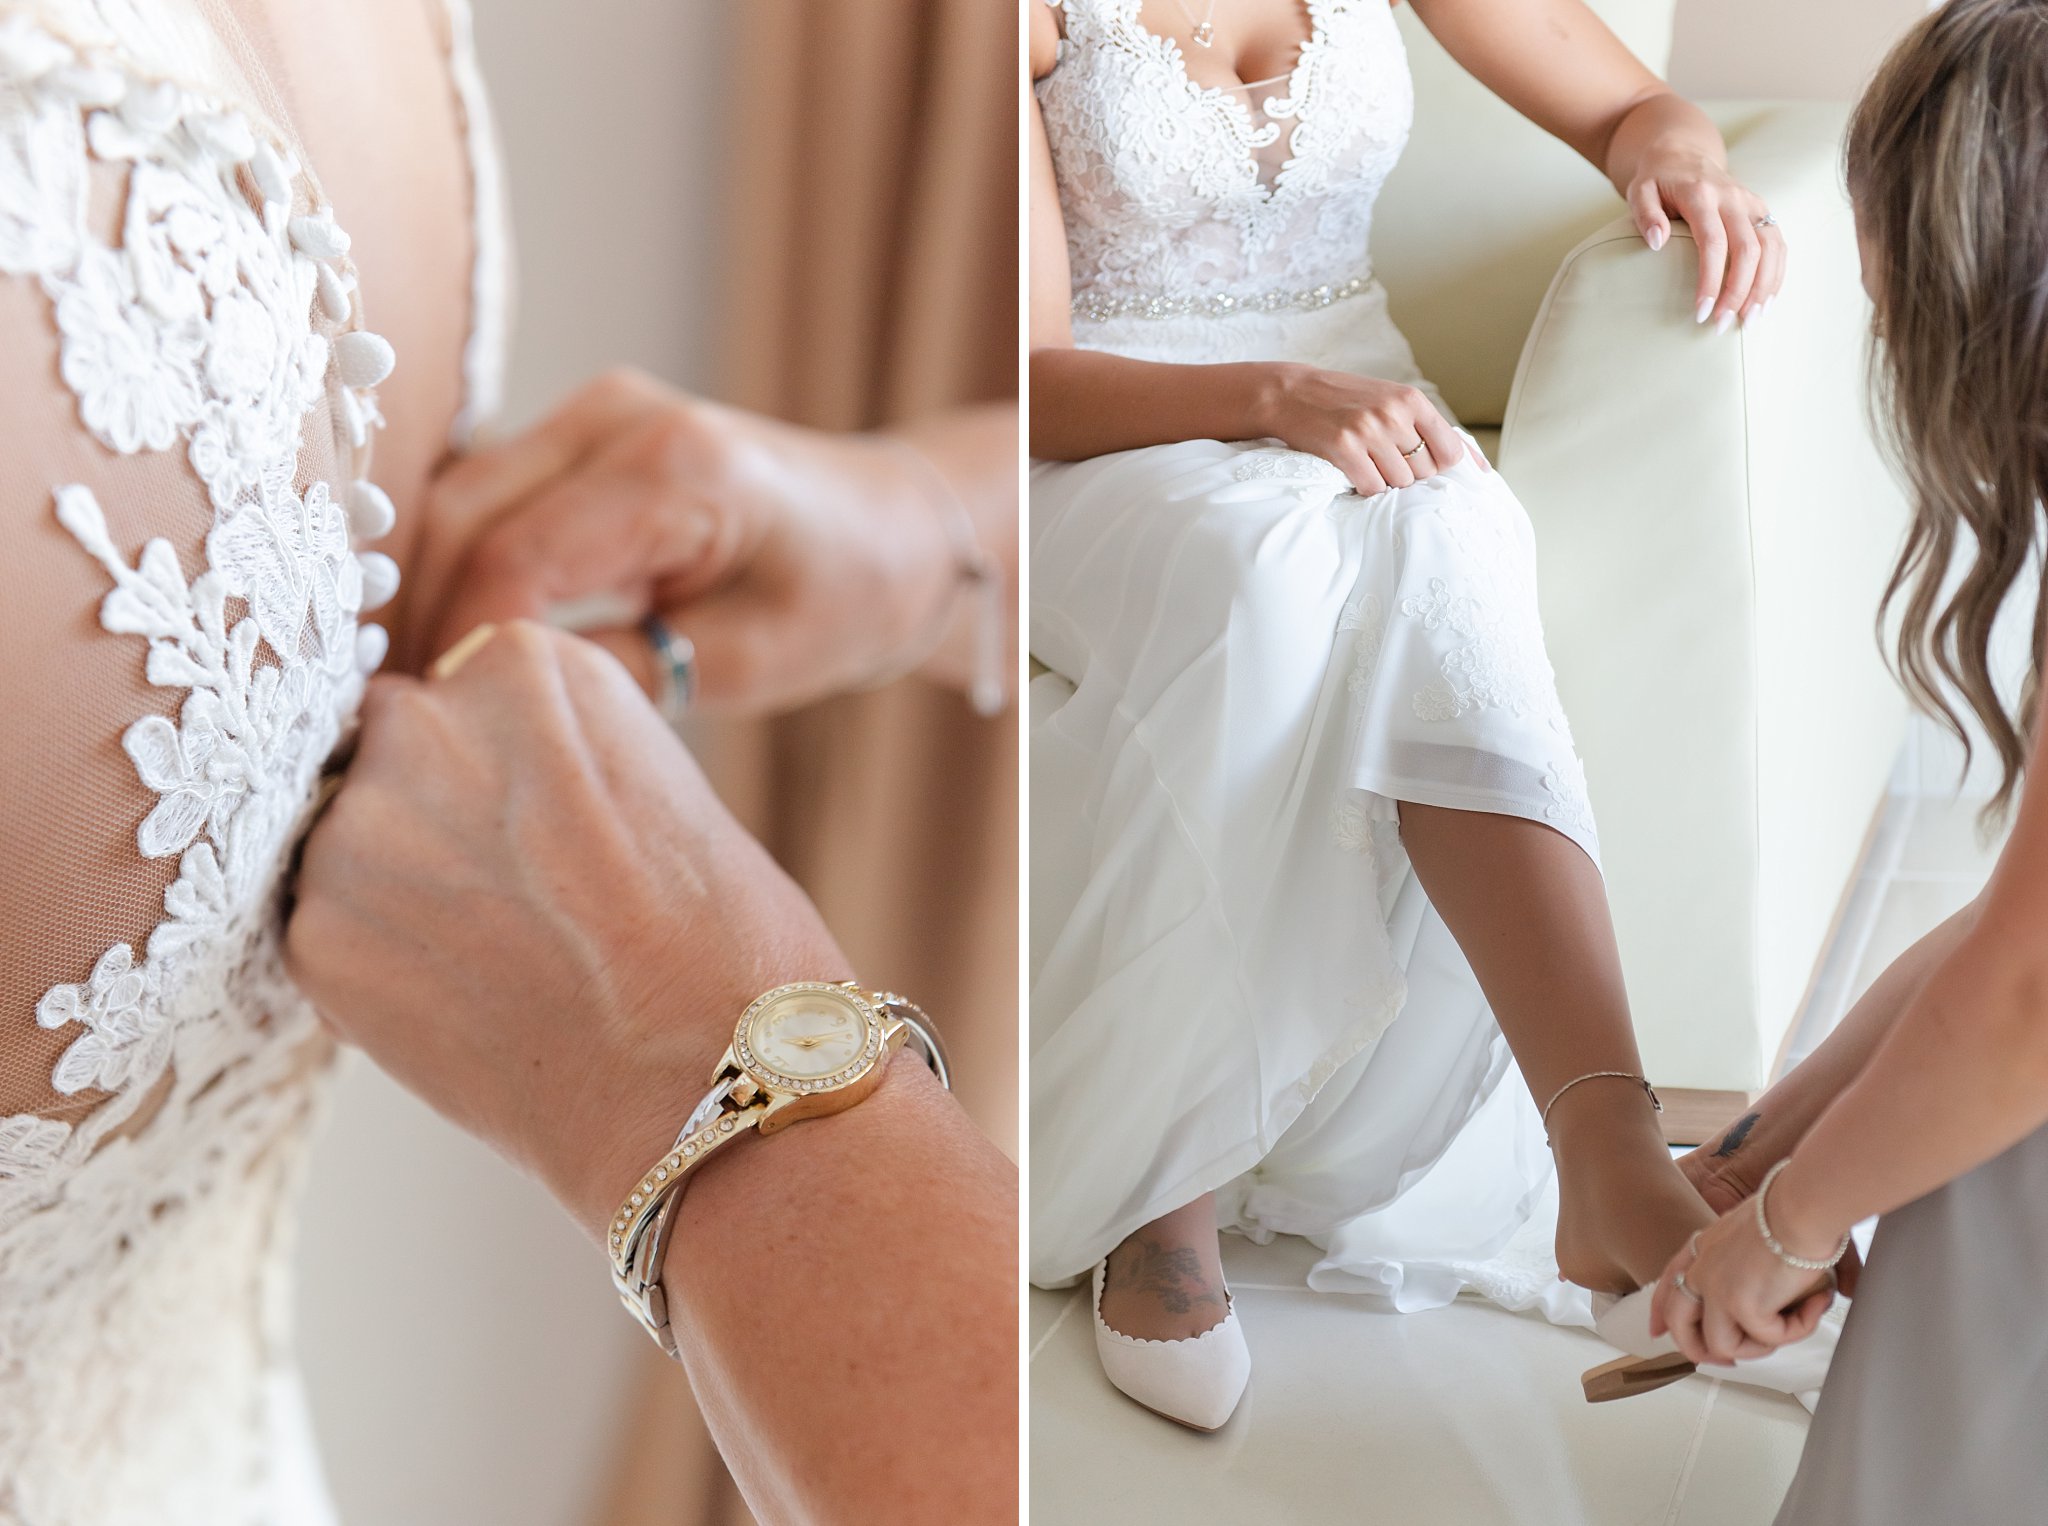 Two photos of a bride getting ready for her wedding day. Photo 1 - Close-up of hands doing up buttons on the back of the bride's dress. Photo 2- a bridesmaid puts on the bride's shoes. Photos by Wedding Photographer in London Ontario Life is Beautiful Photography